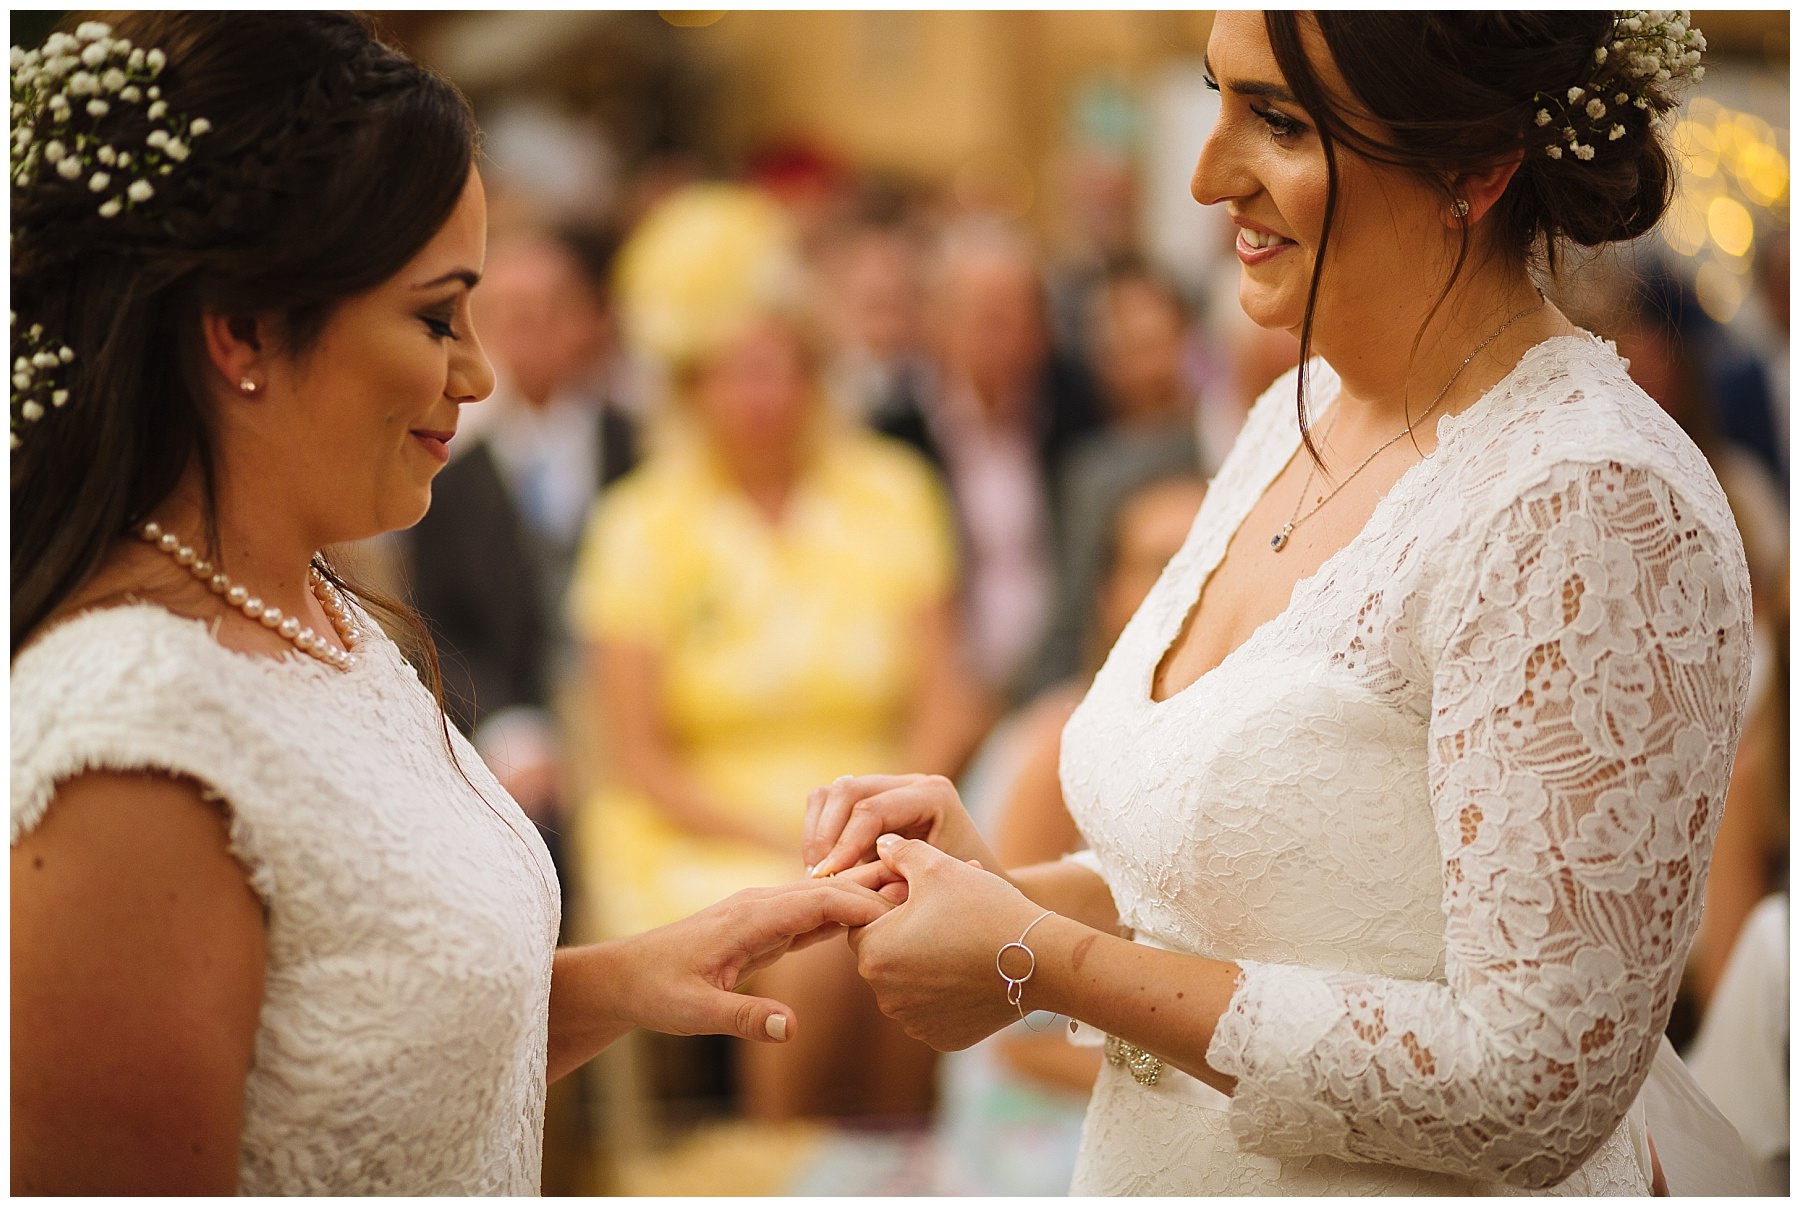 brides exchange rings during wellbeing farm wedding